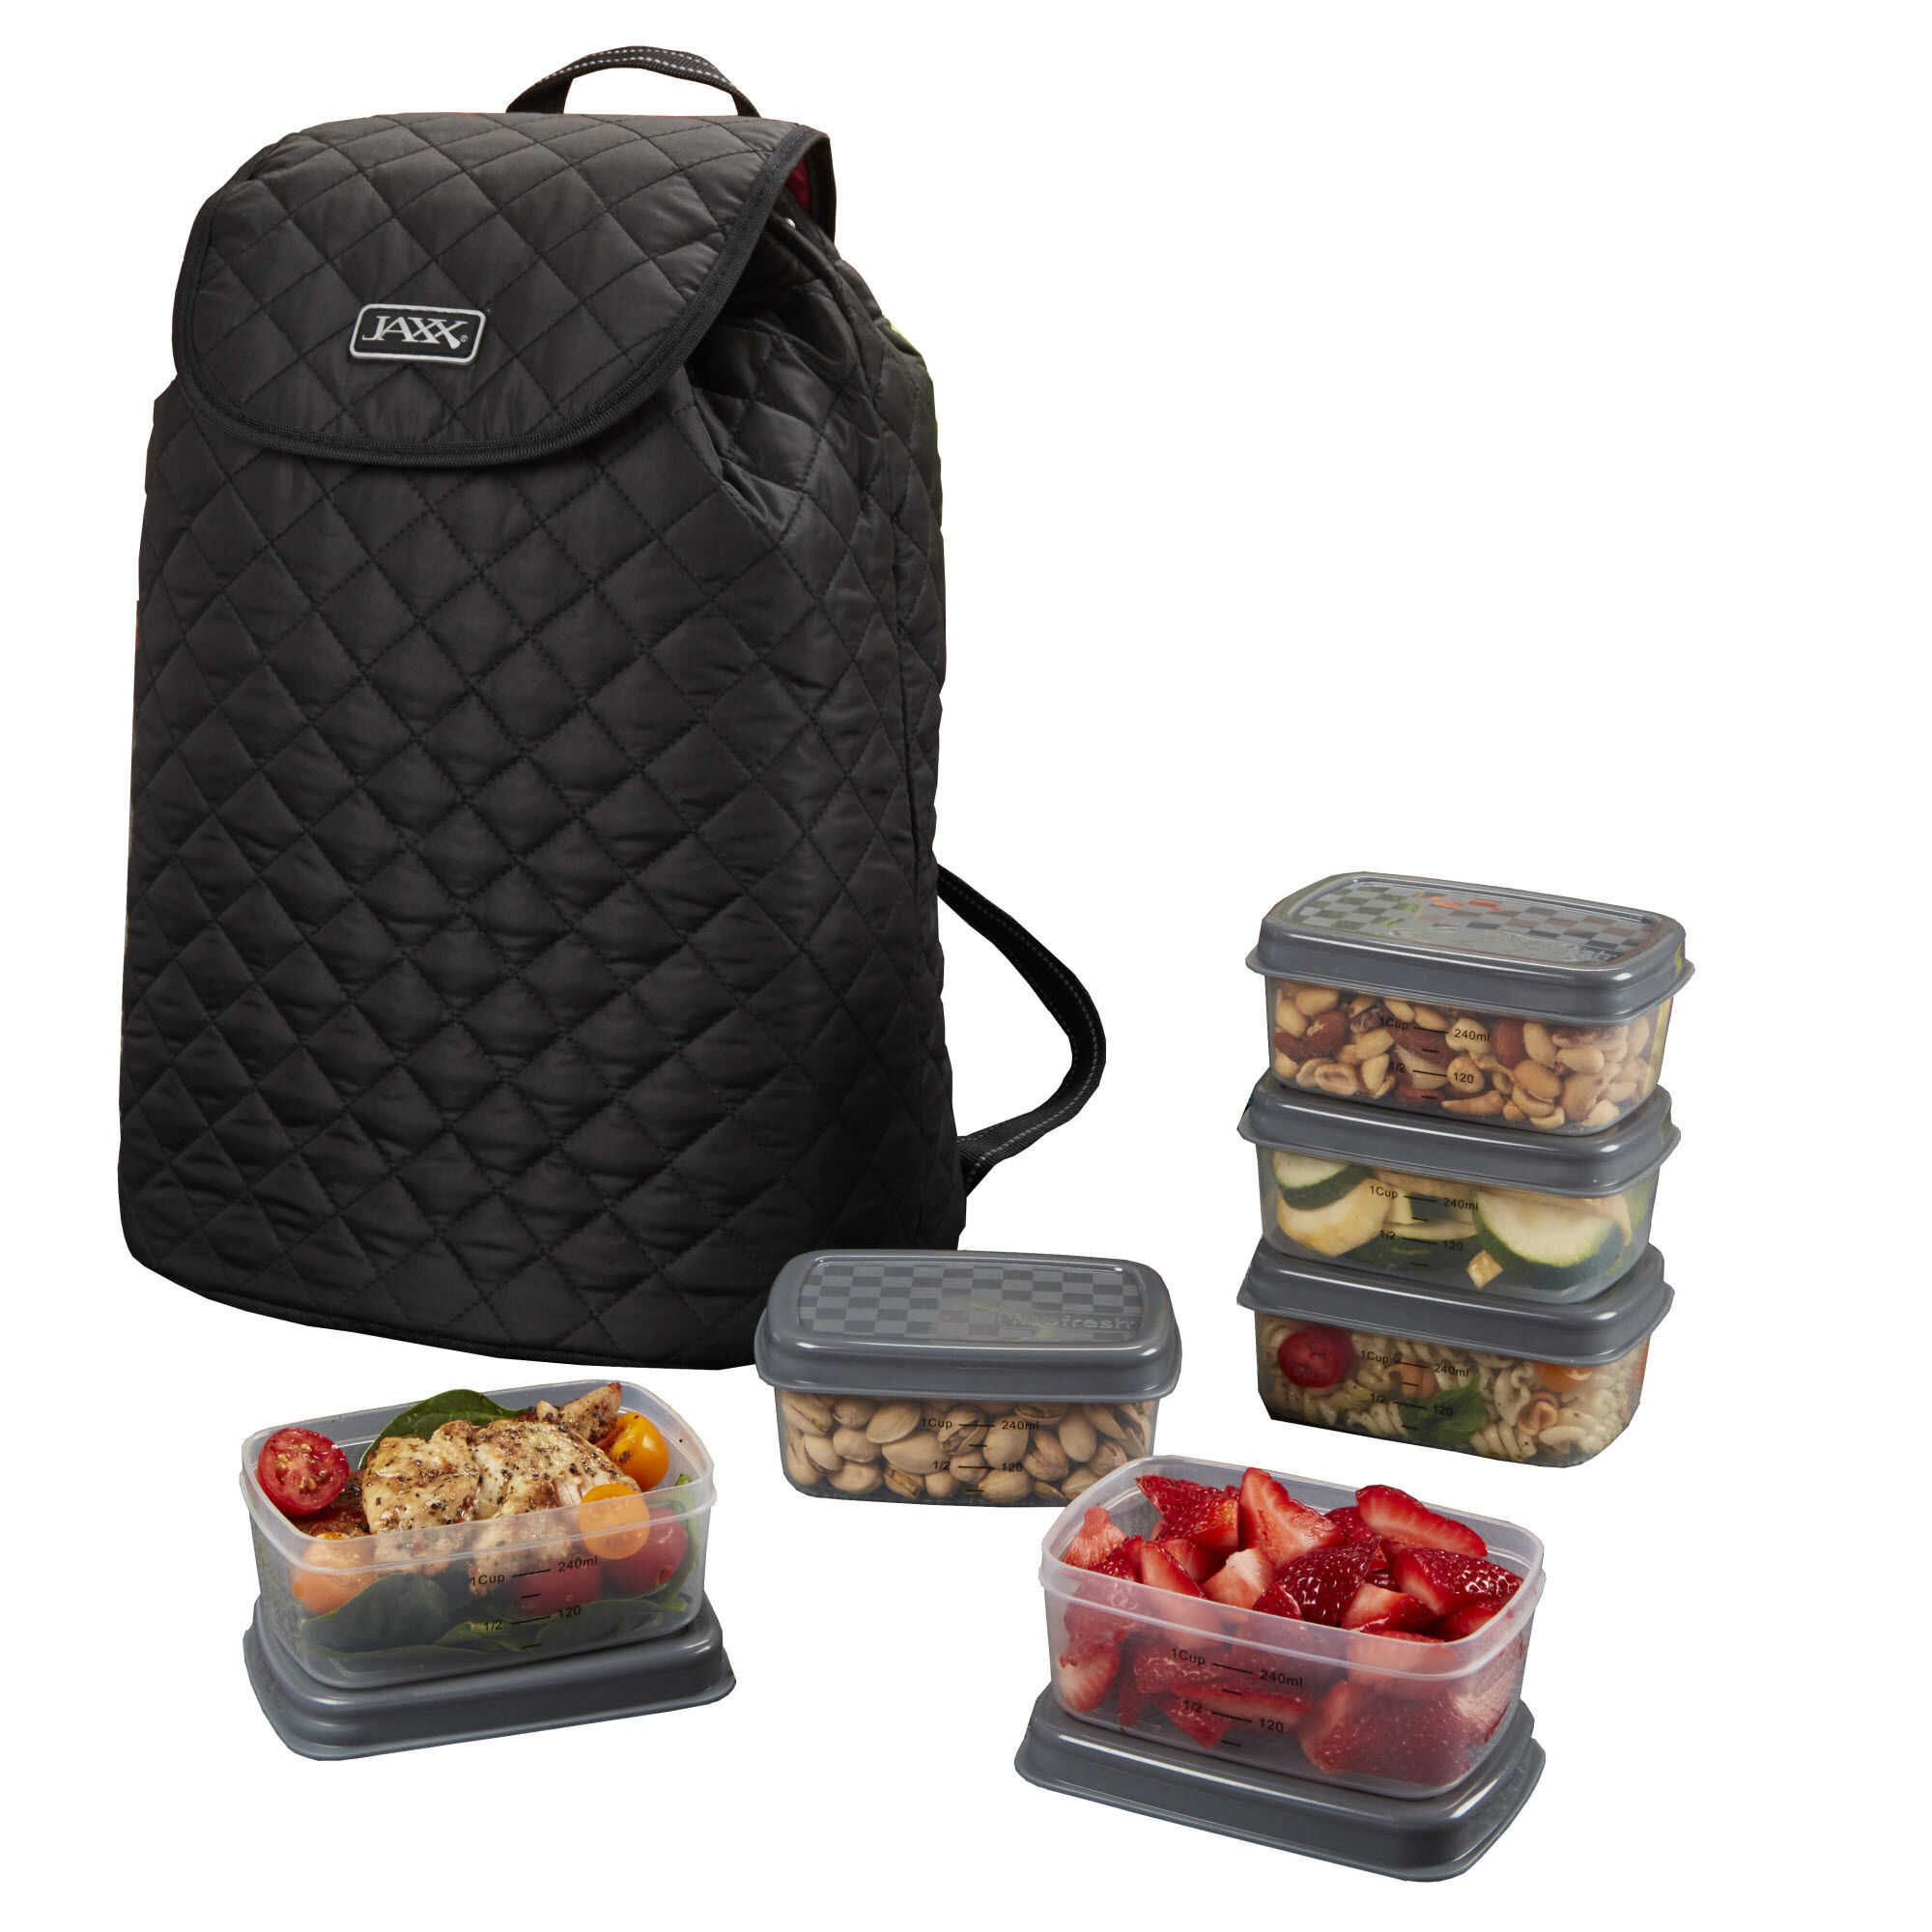 The lunchbox with six separate containers filled with food